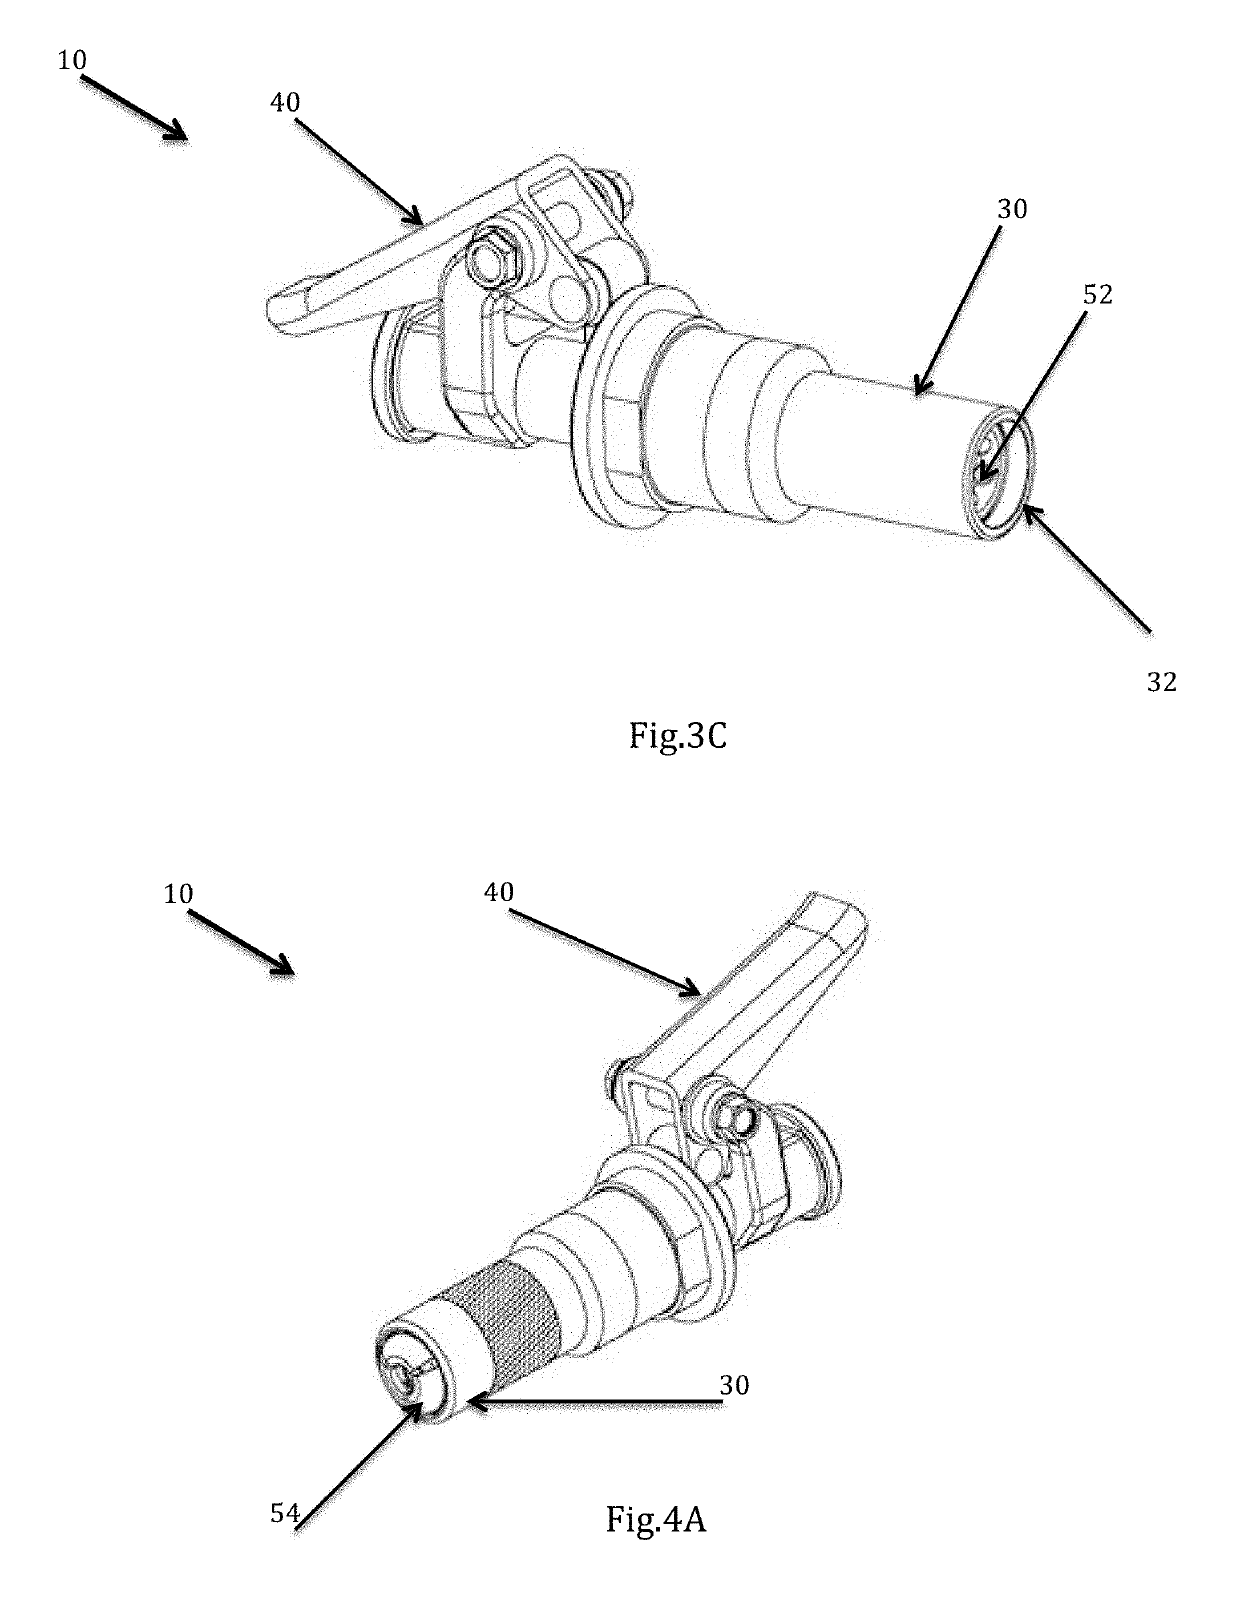 A coupling device